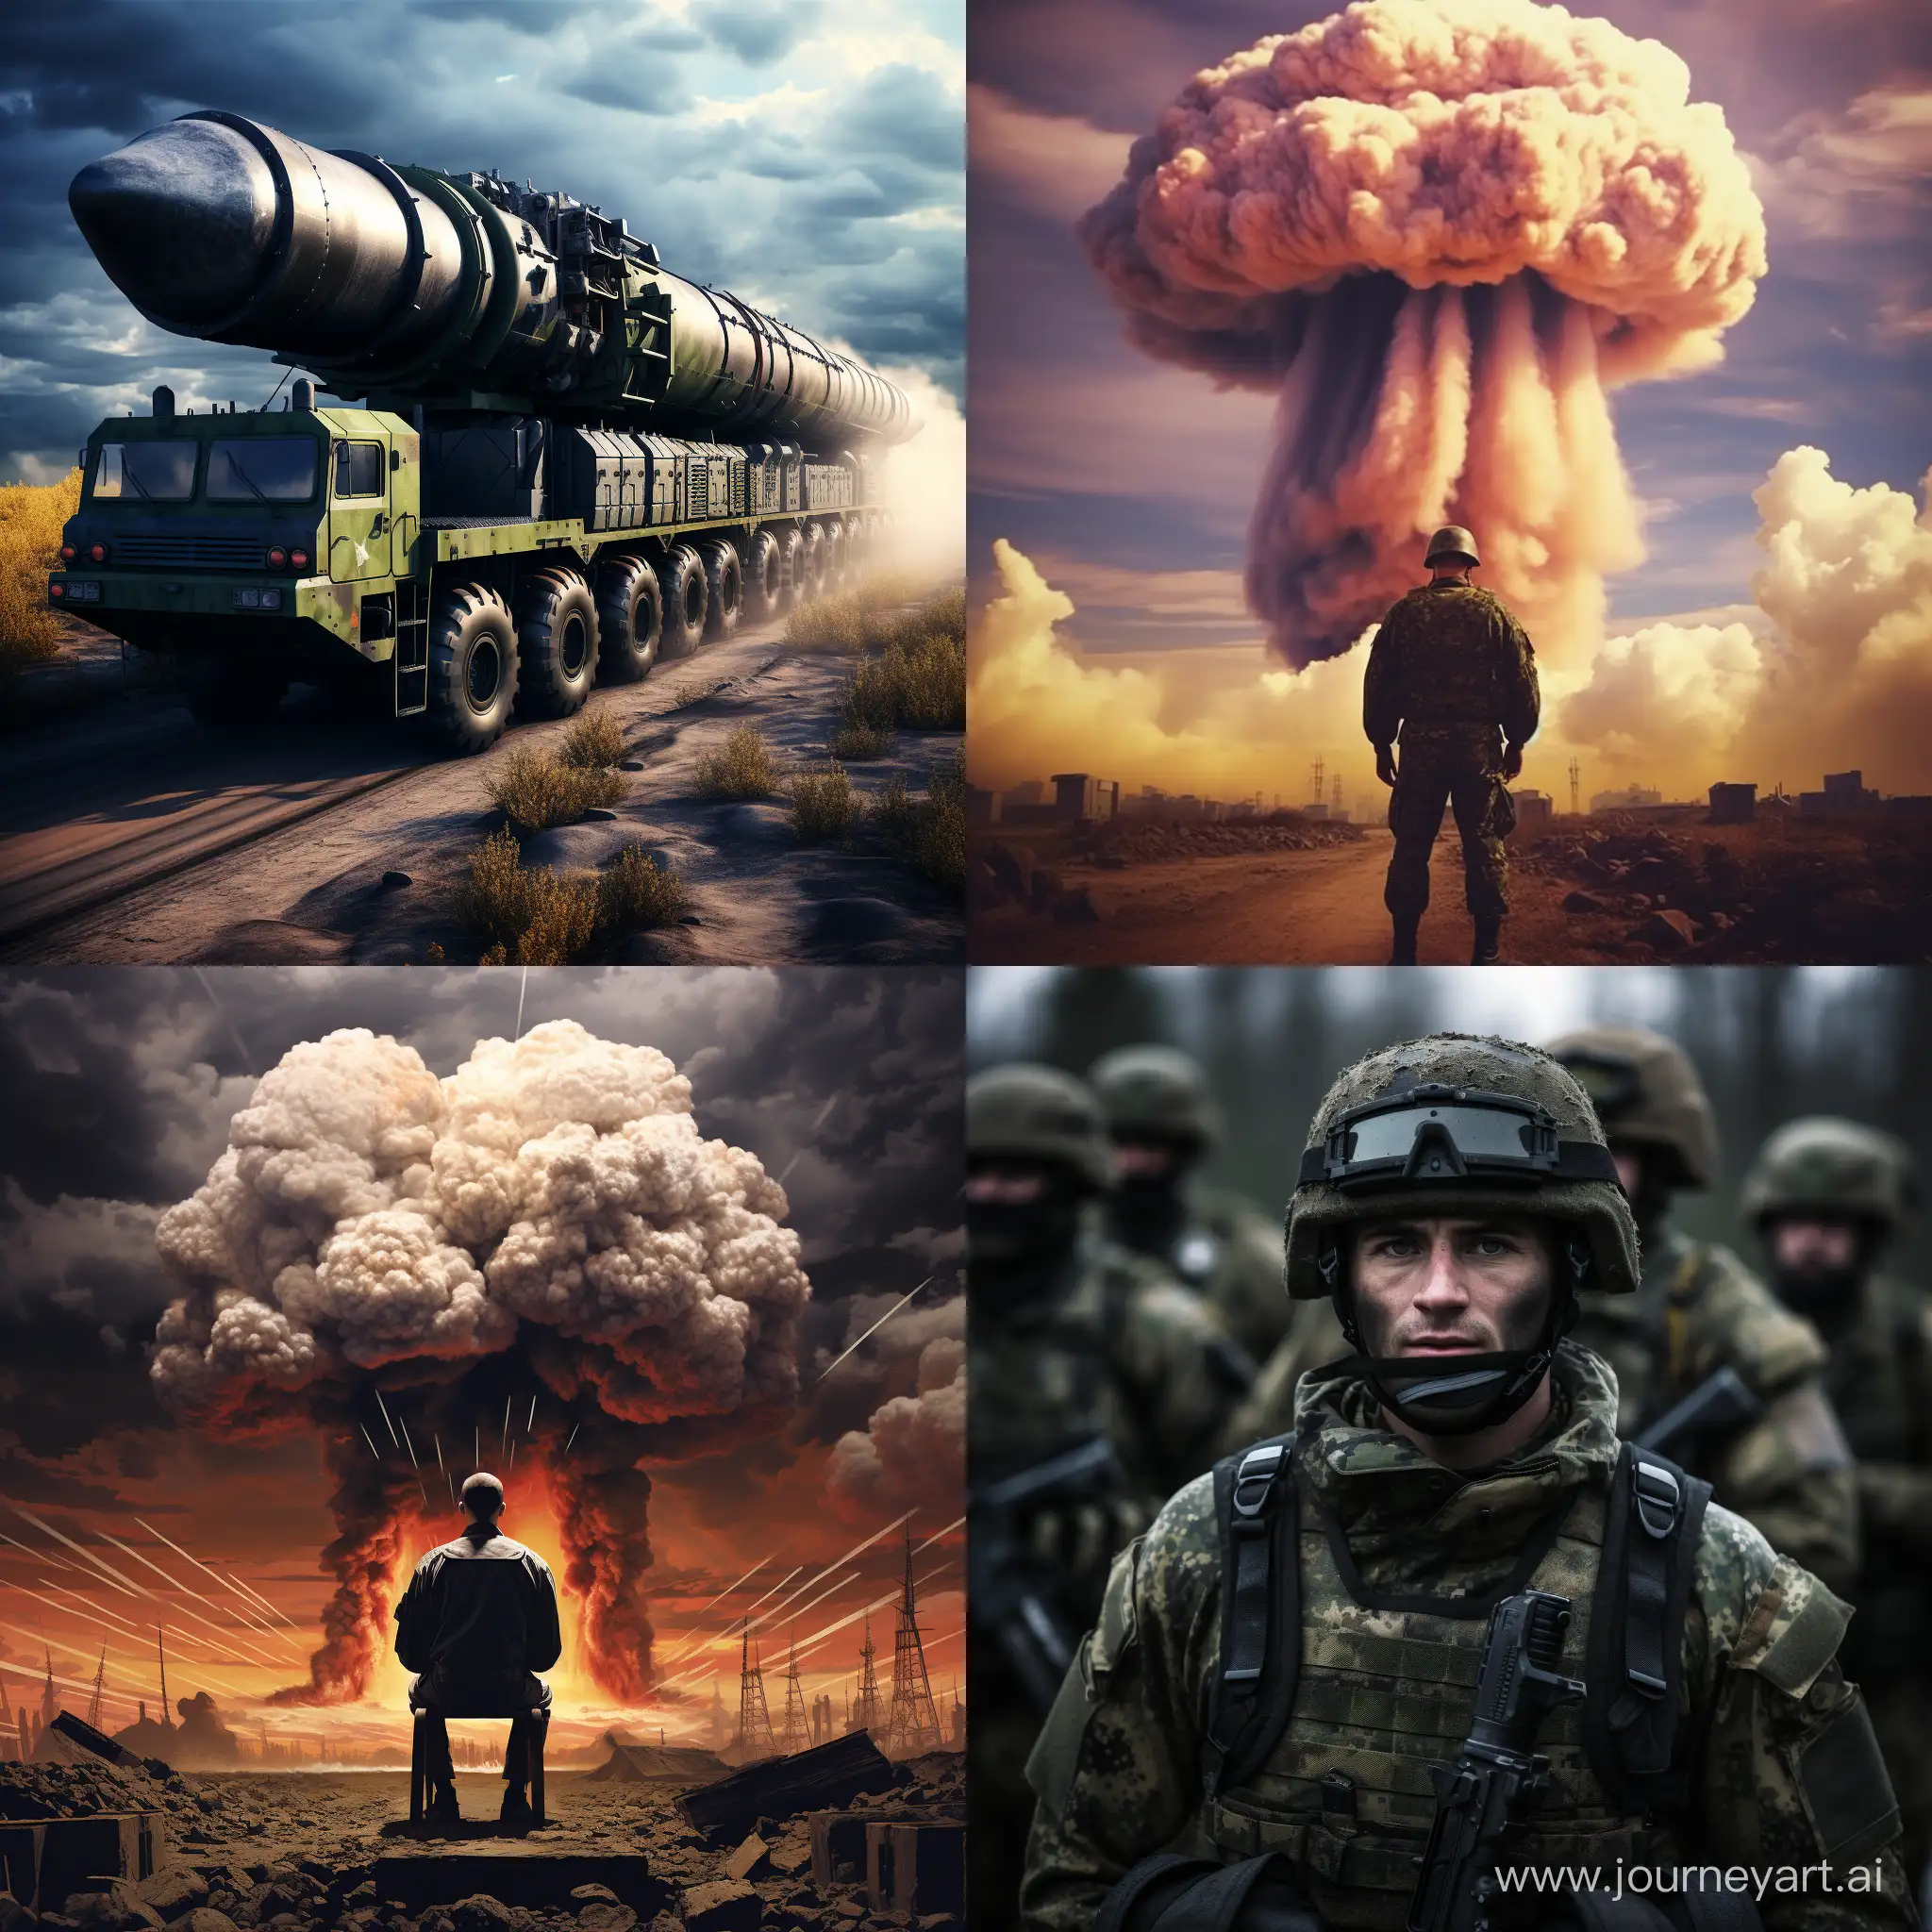 Ukrainian army and its third nuclear arsenal in the world